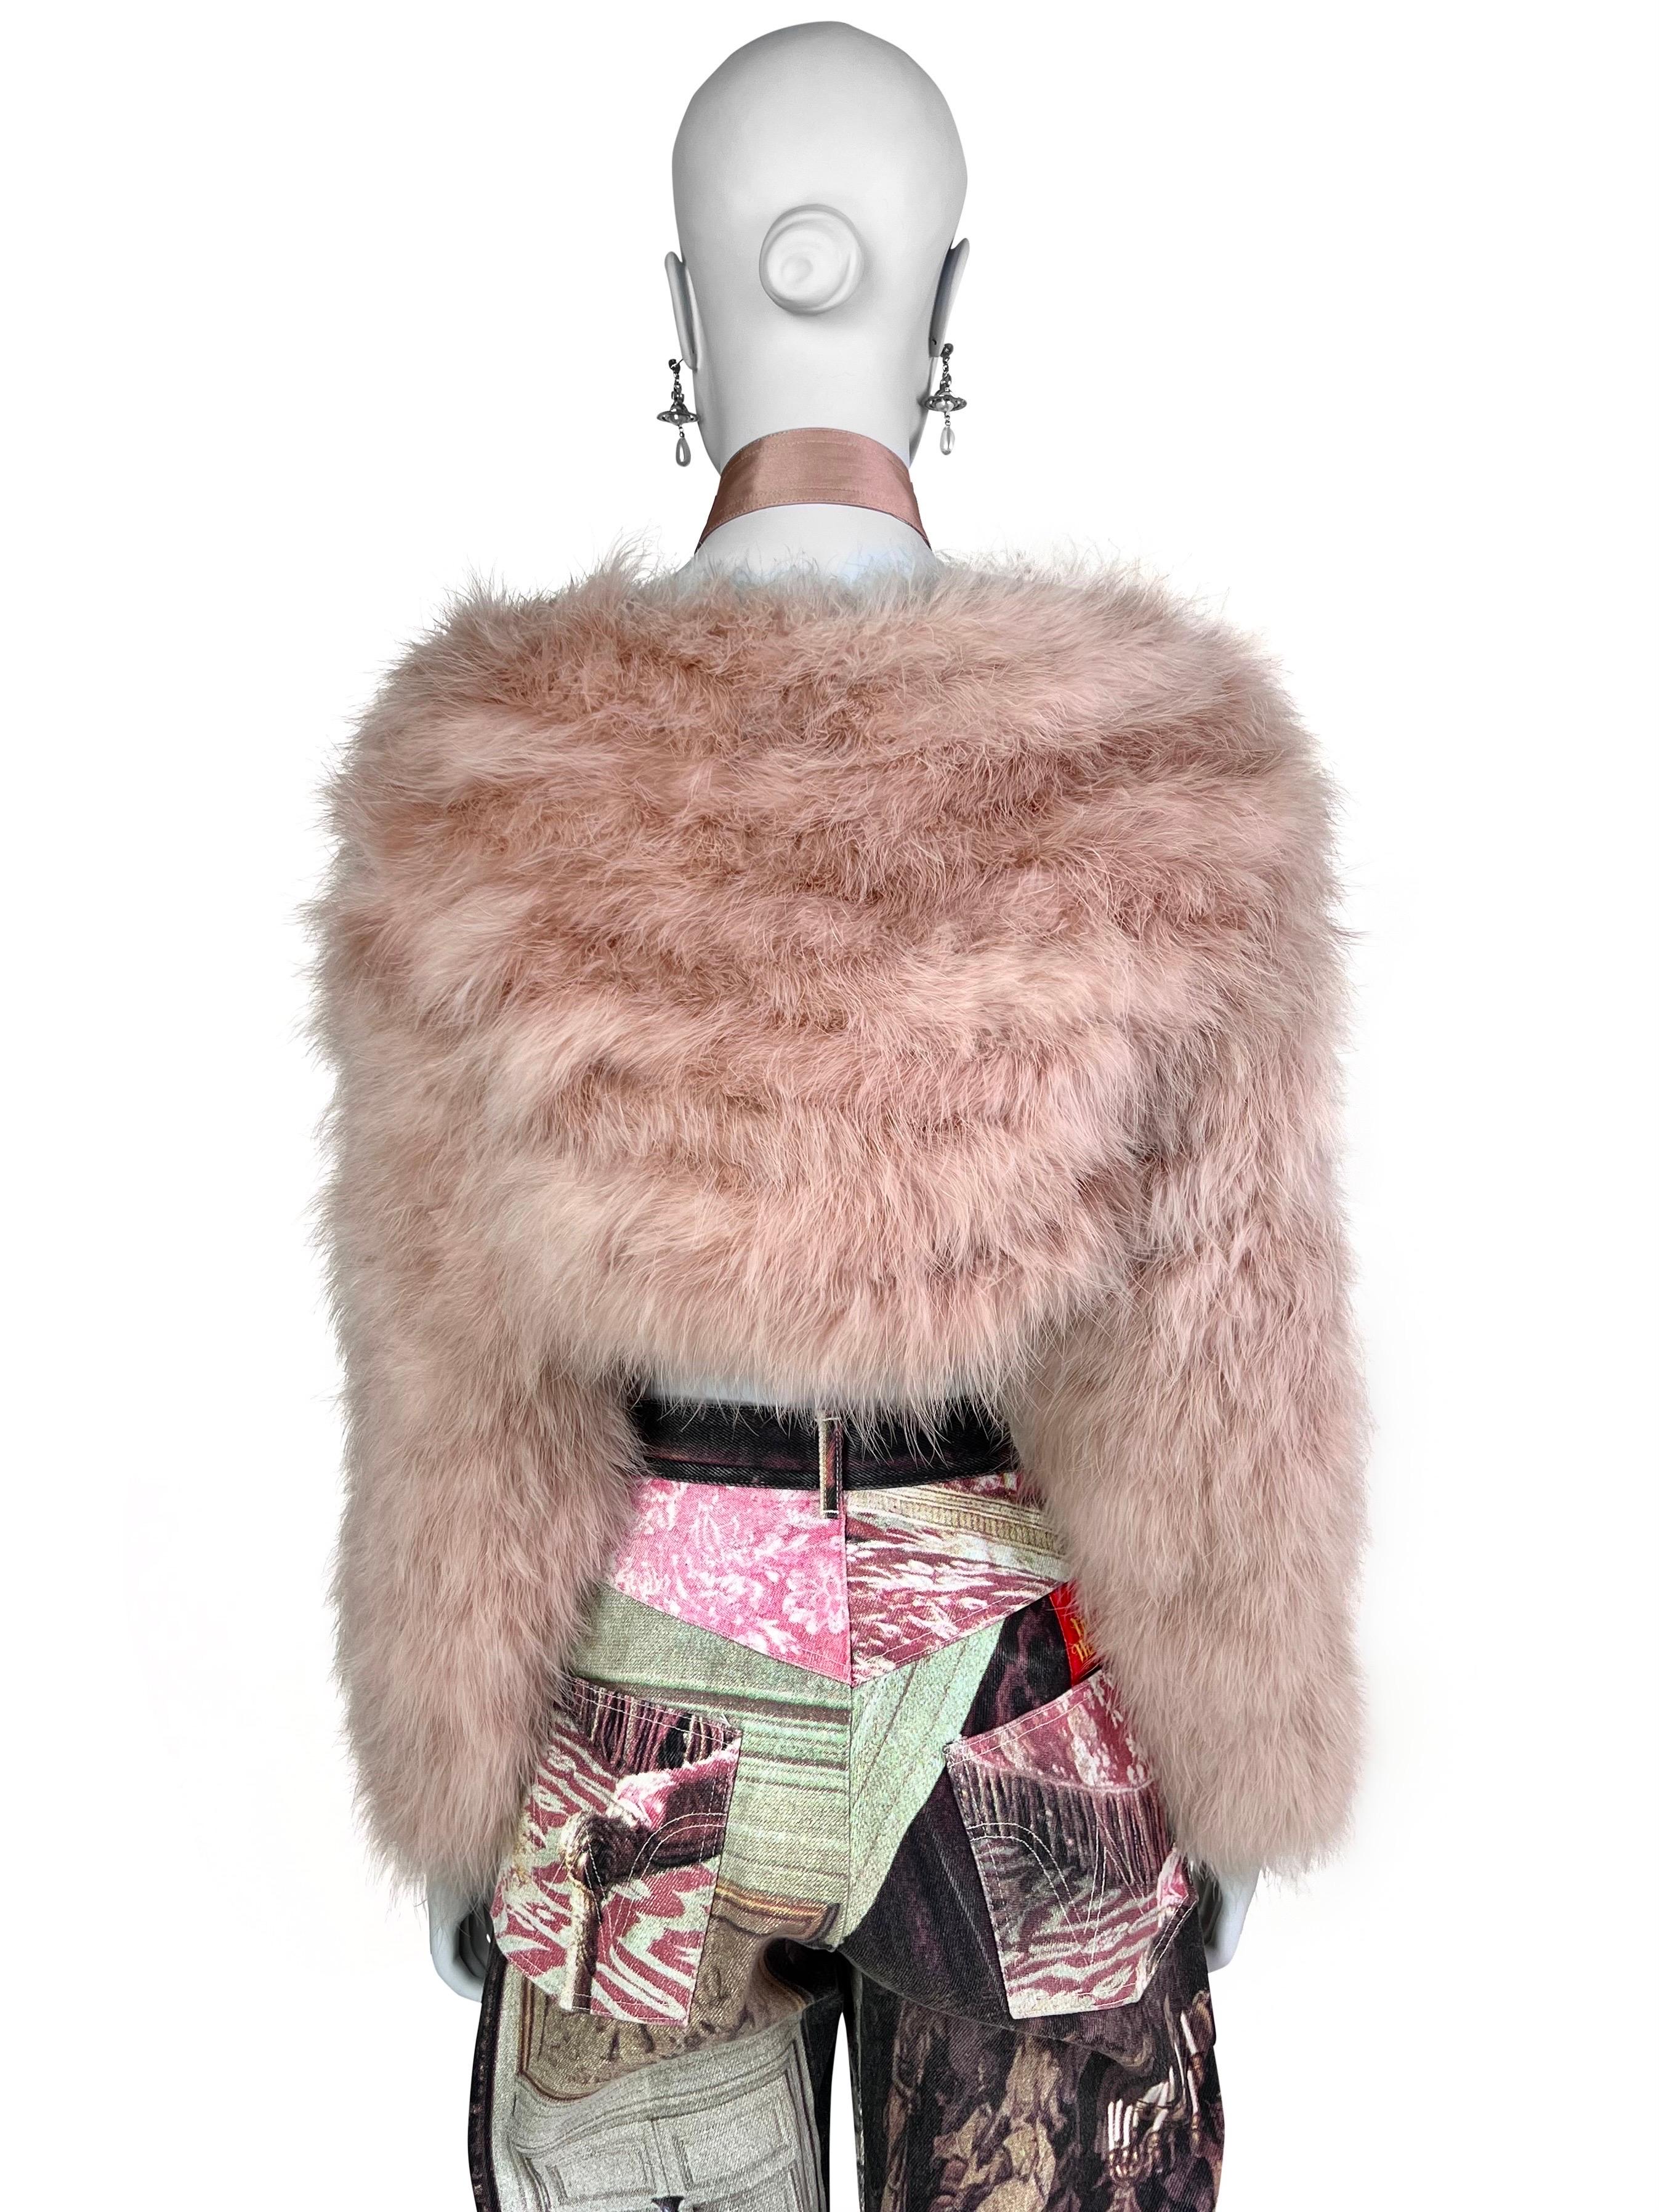 Gucci by Tom Ford Spring 2004 Blush Pink Marabout Feather Bolero Jacket 1